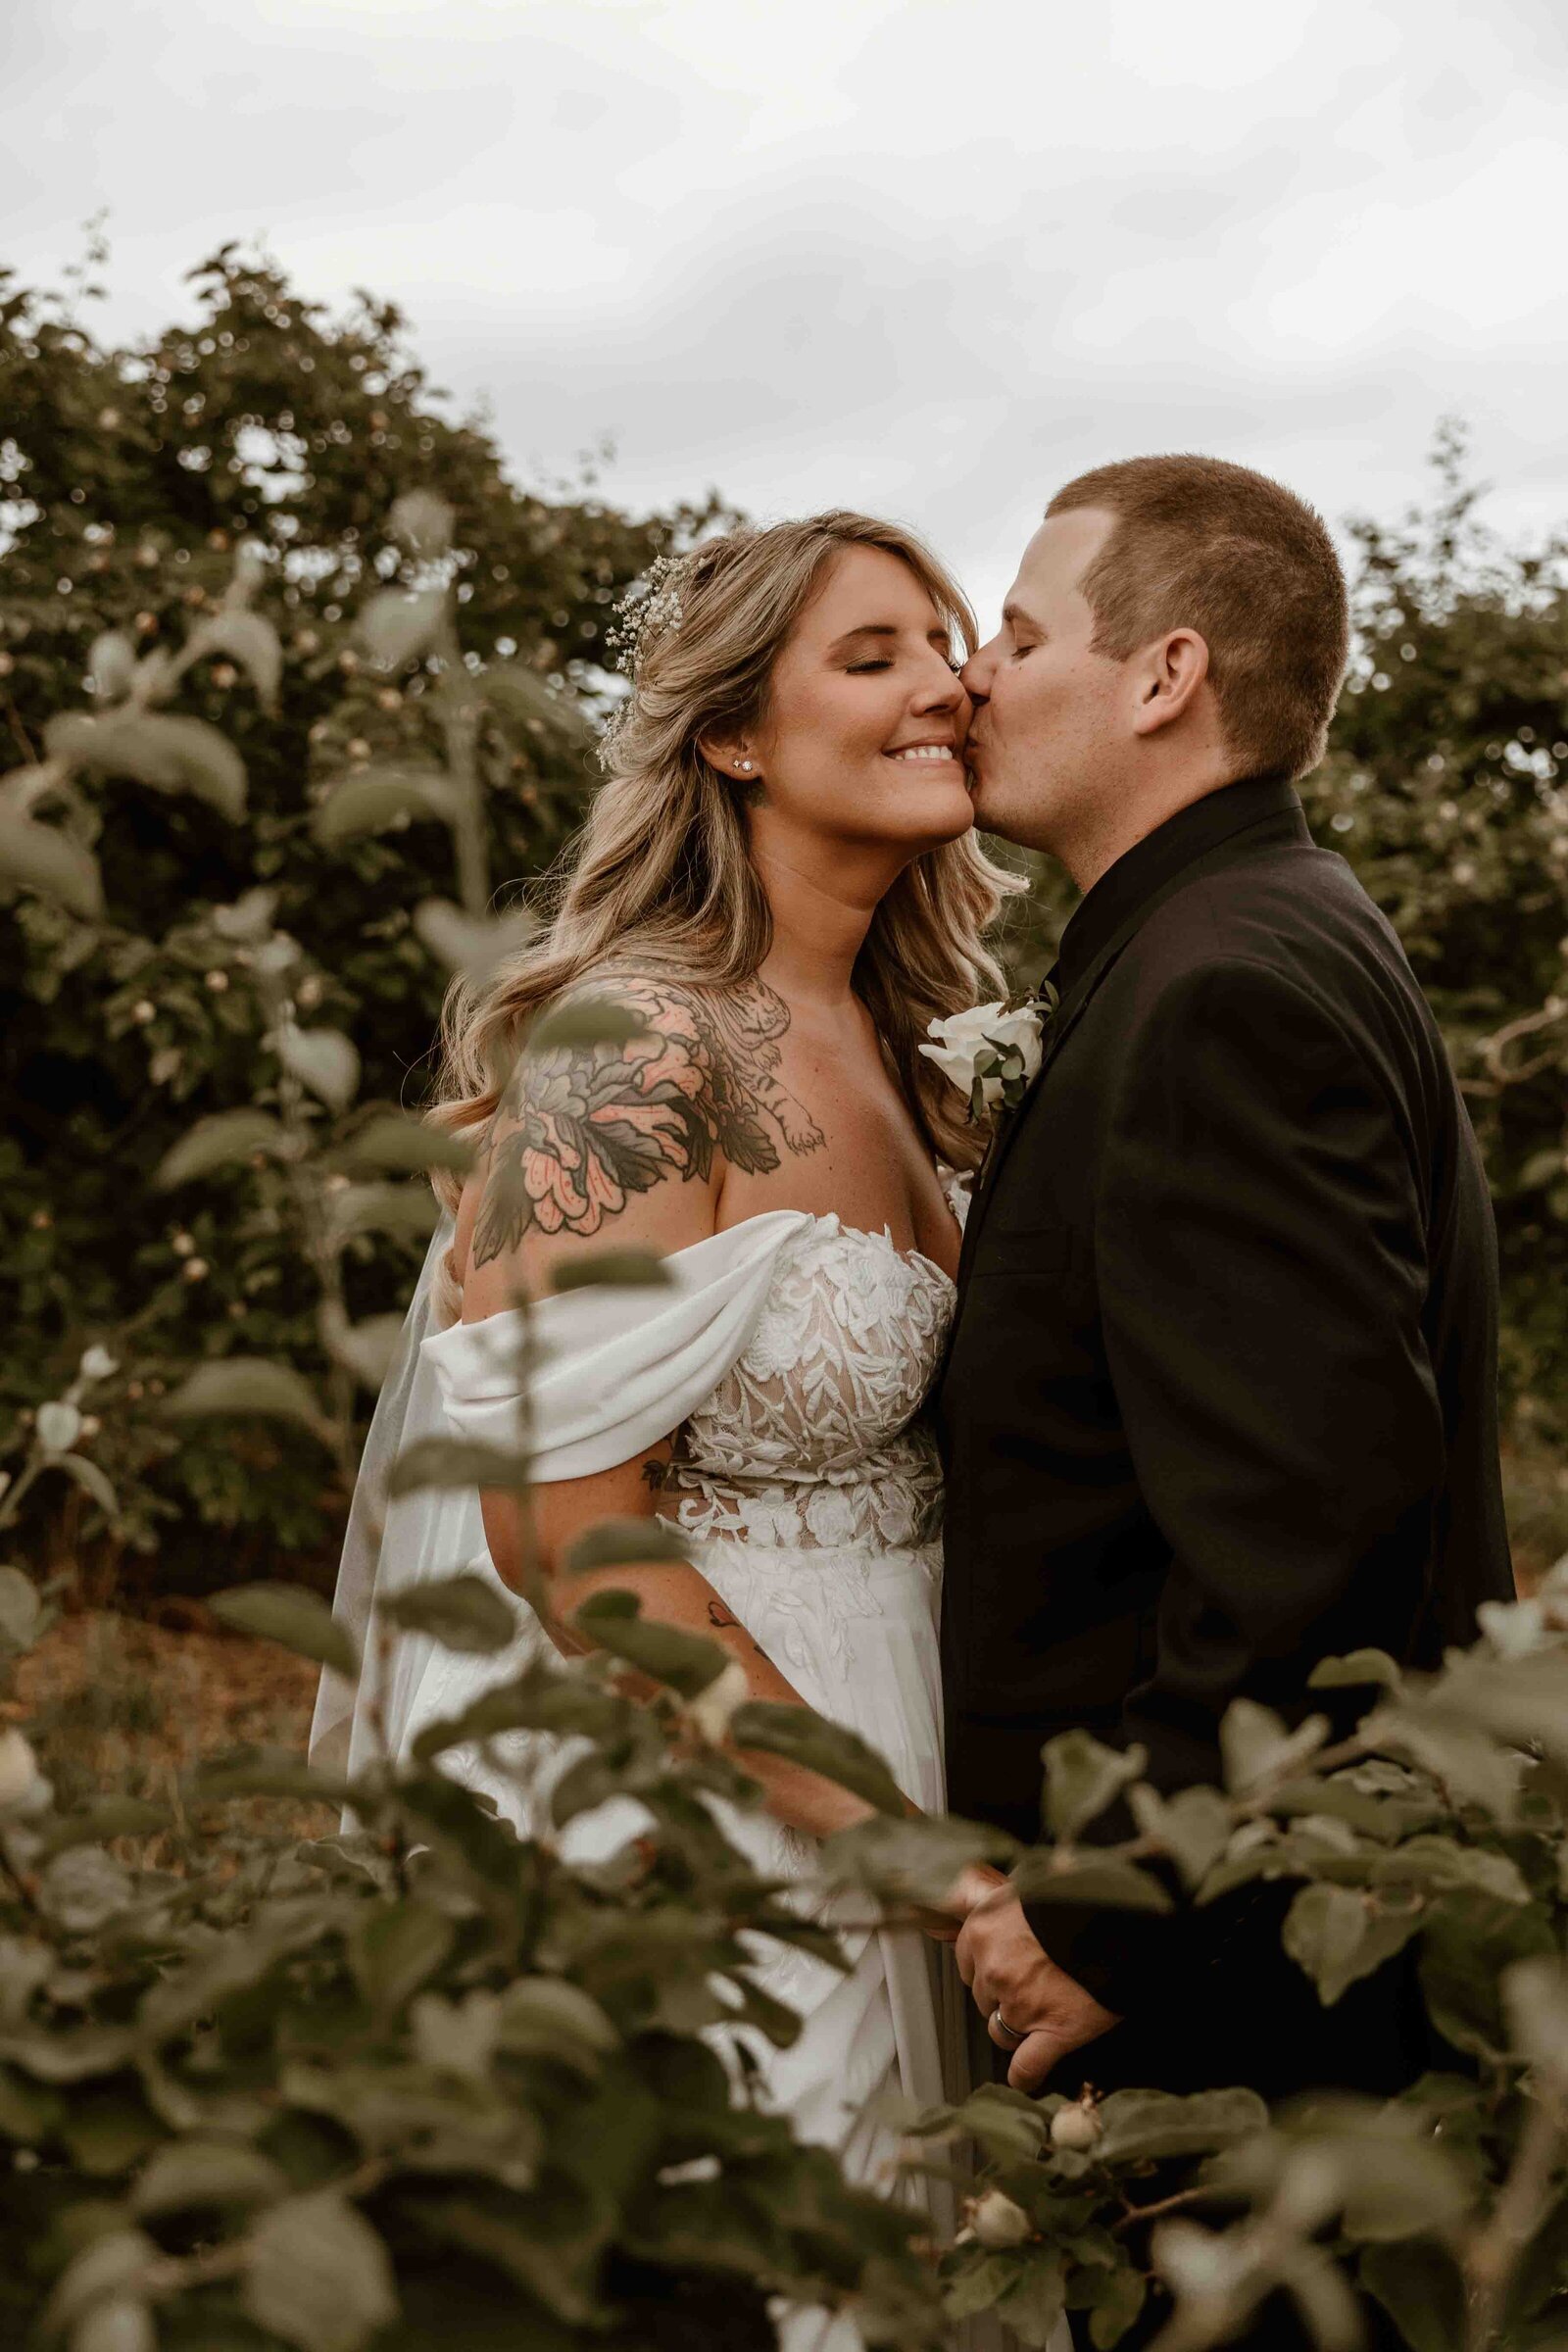 Married couple kissing on cheek between trees.